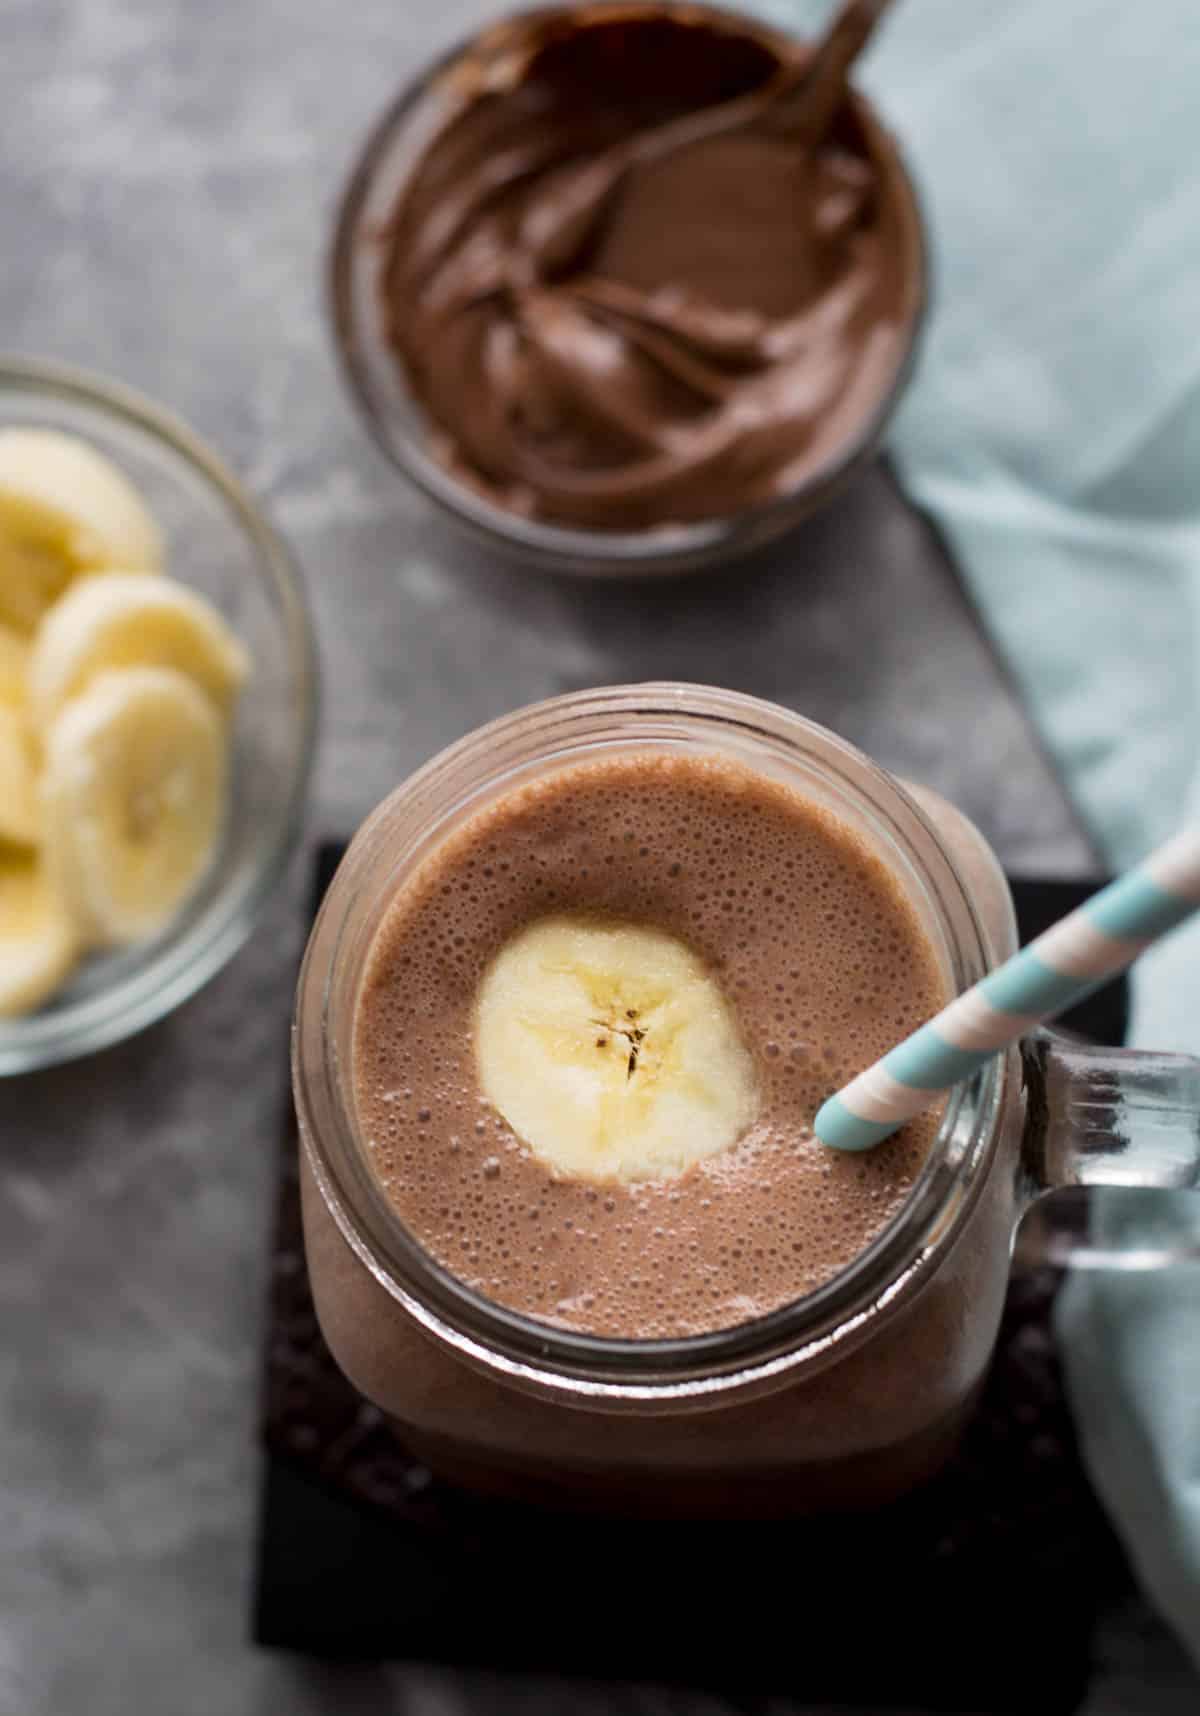 What's not to love about this delicious Banana Nutella Smoothie Recipe - a healthy-ish drink made from bananas and milk with a hint of Nutella and cocoa powder.